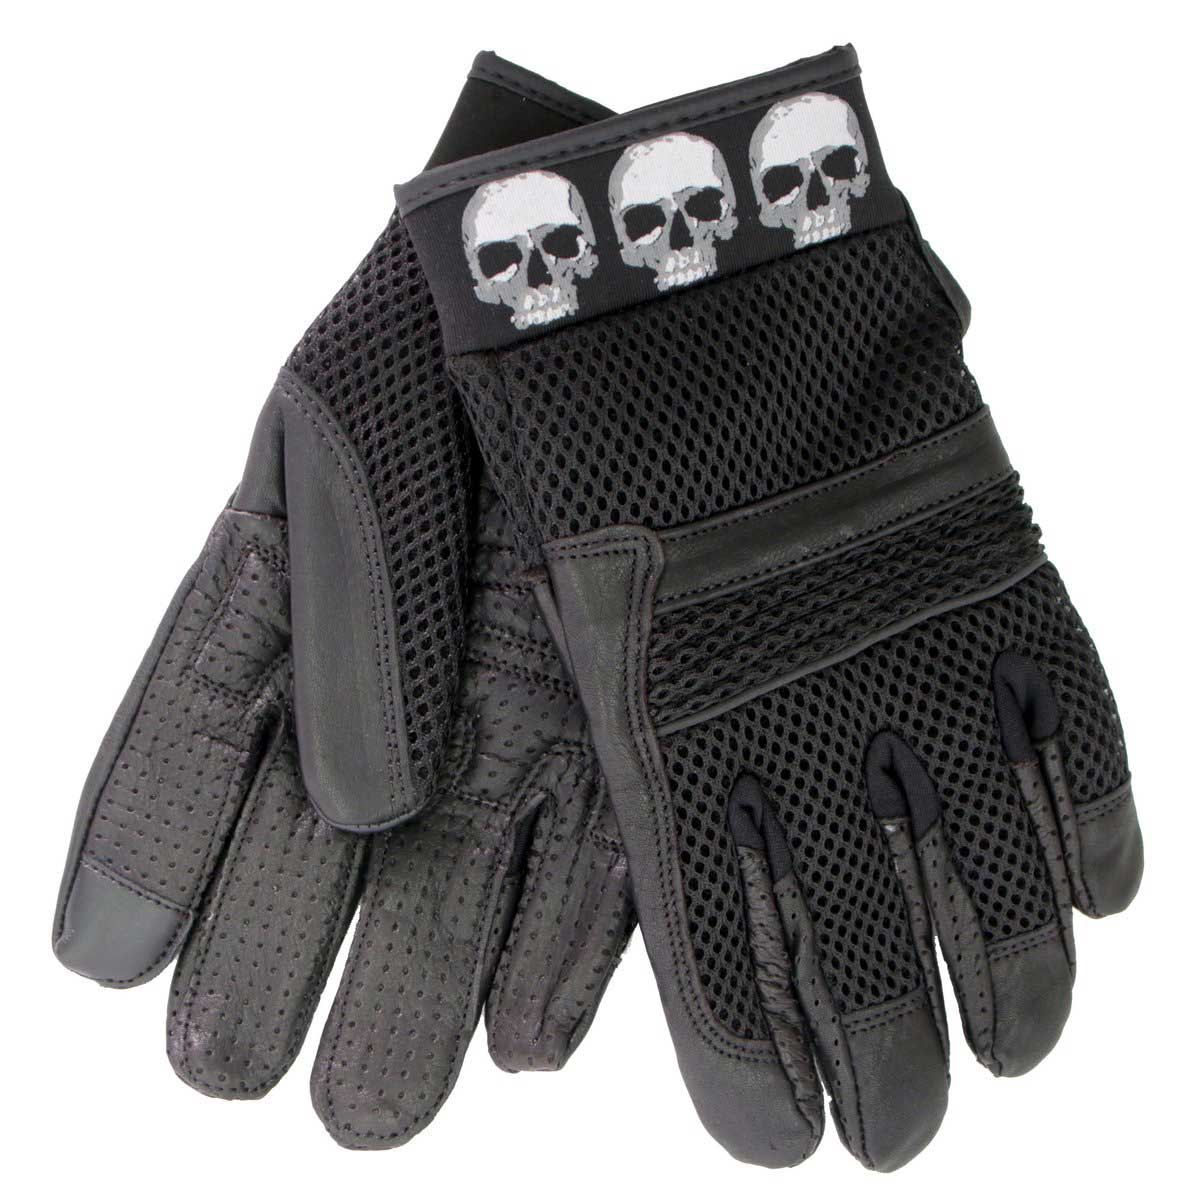 Hot Leathers GVM1301 Uni-Sex Black 'Row of Skulls' Leather and Mesh Gloves with i-Touch Screen